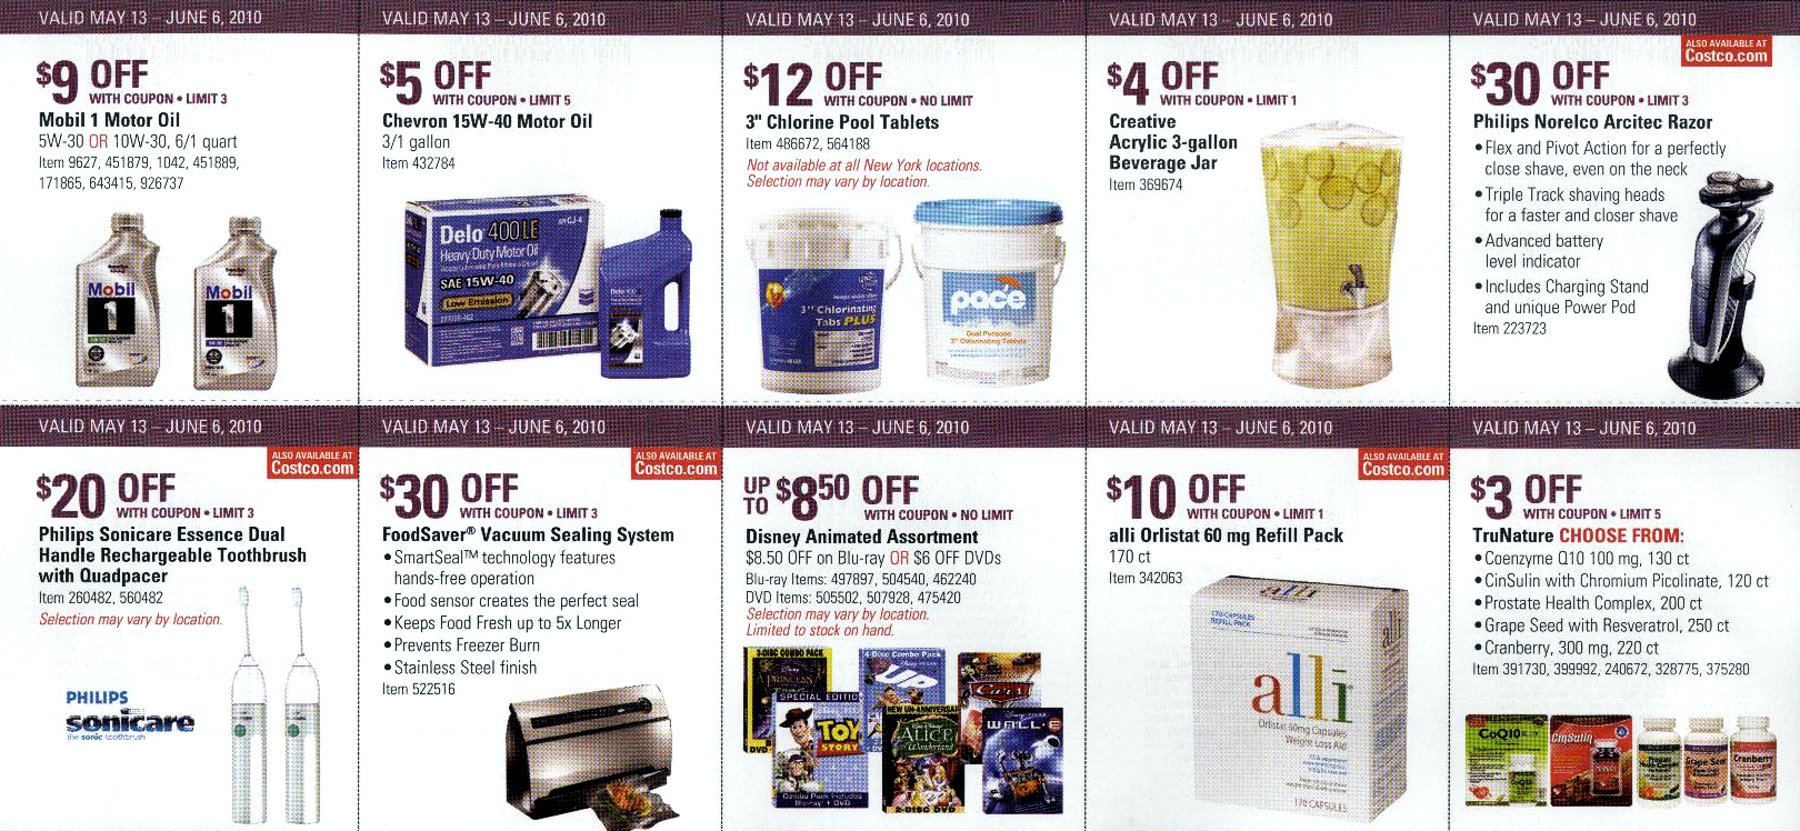 Coupon book full size page ->7<-